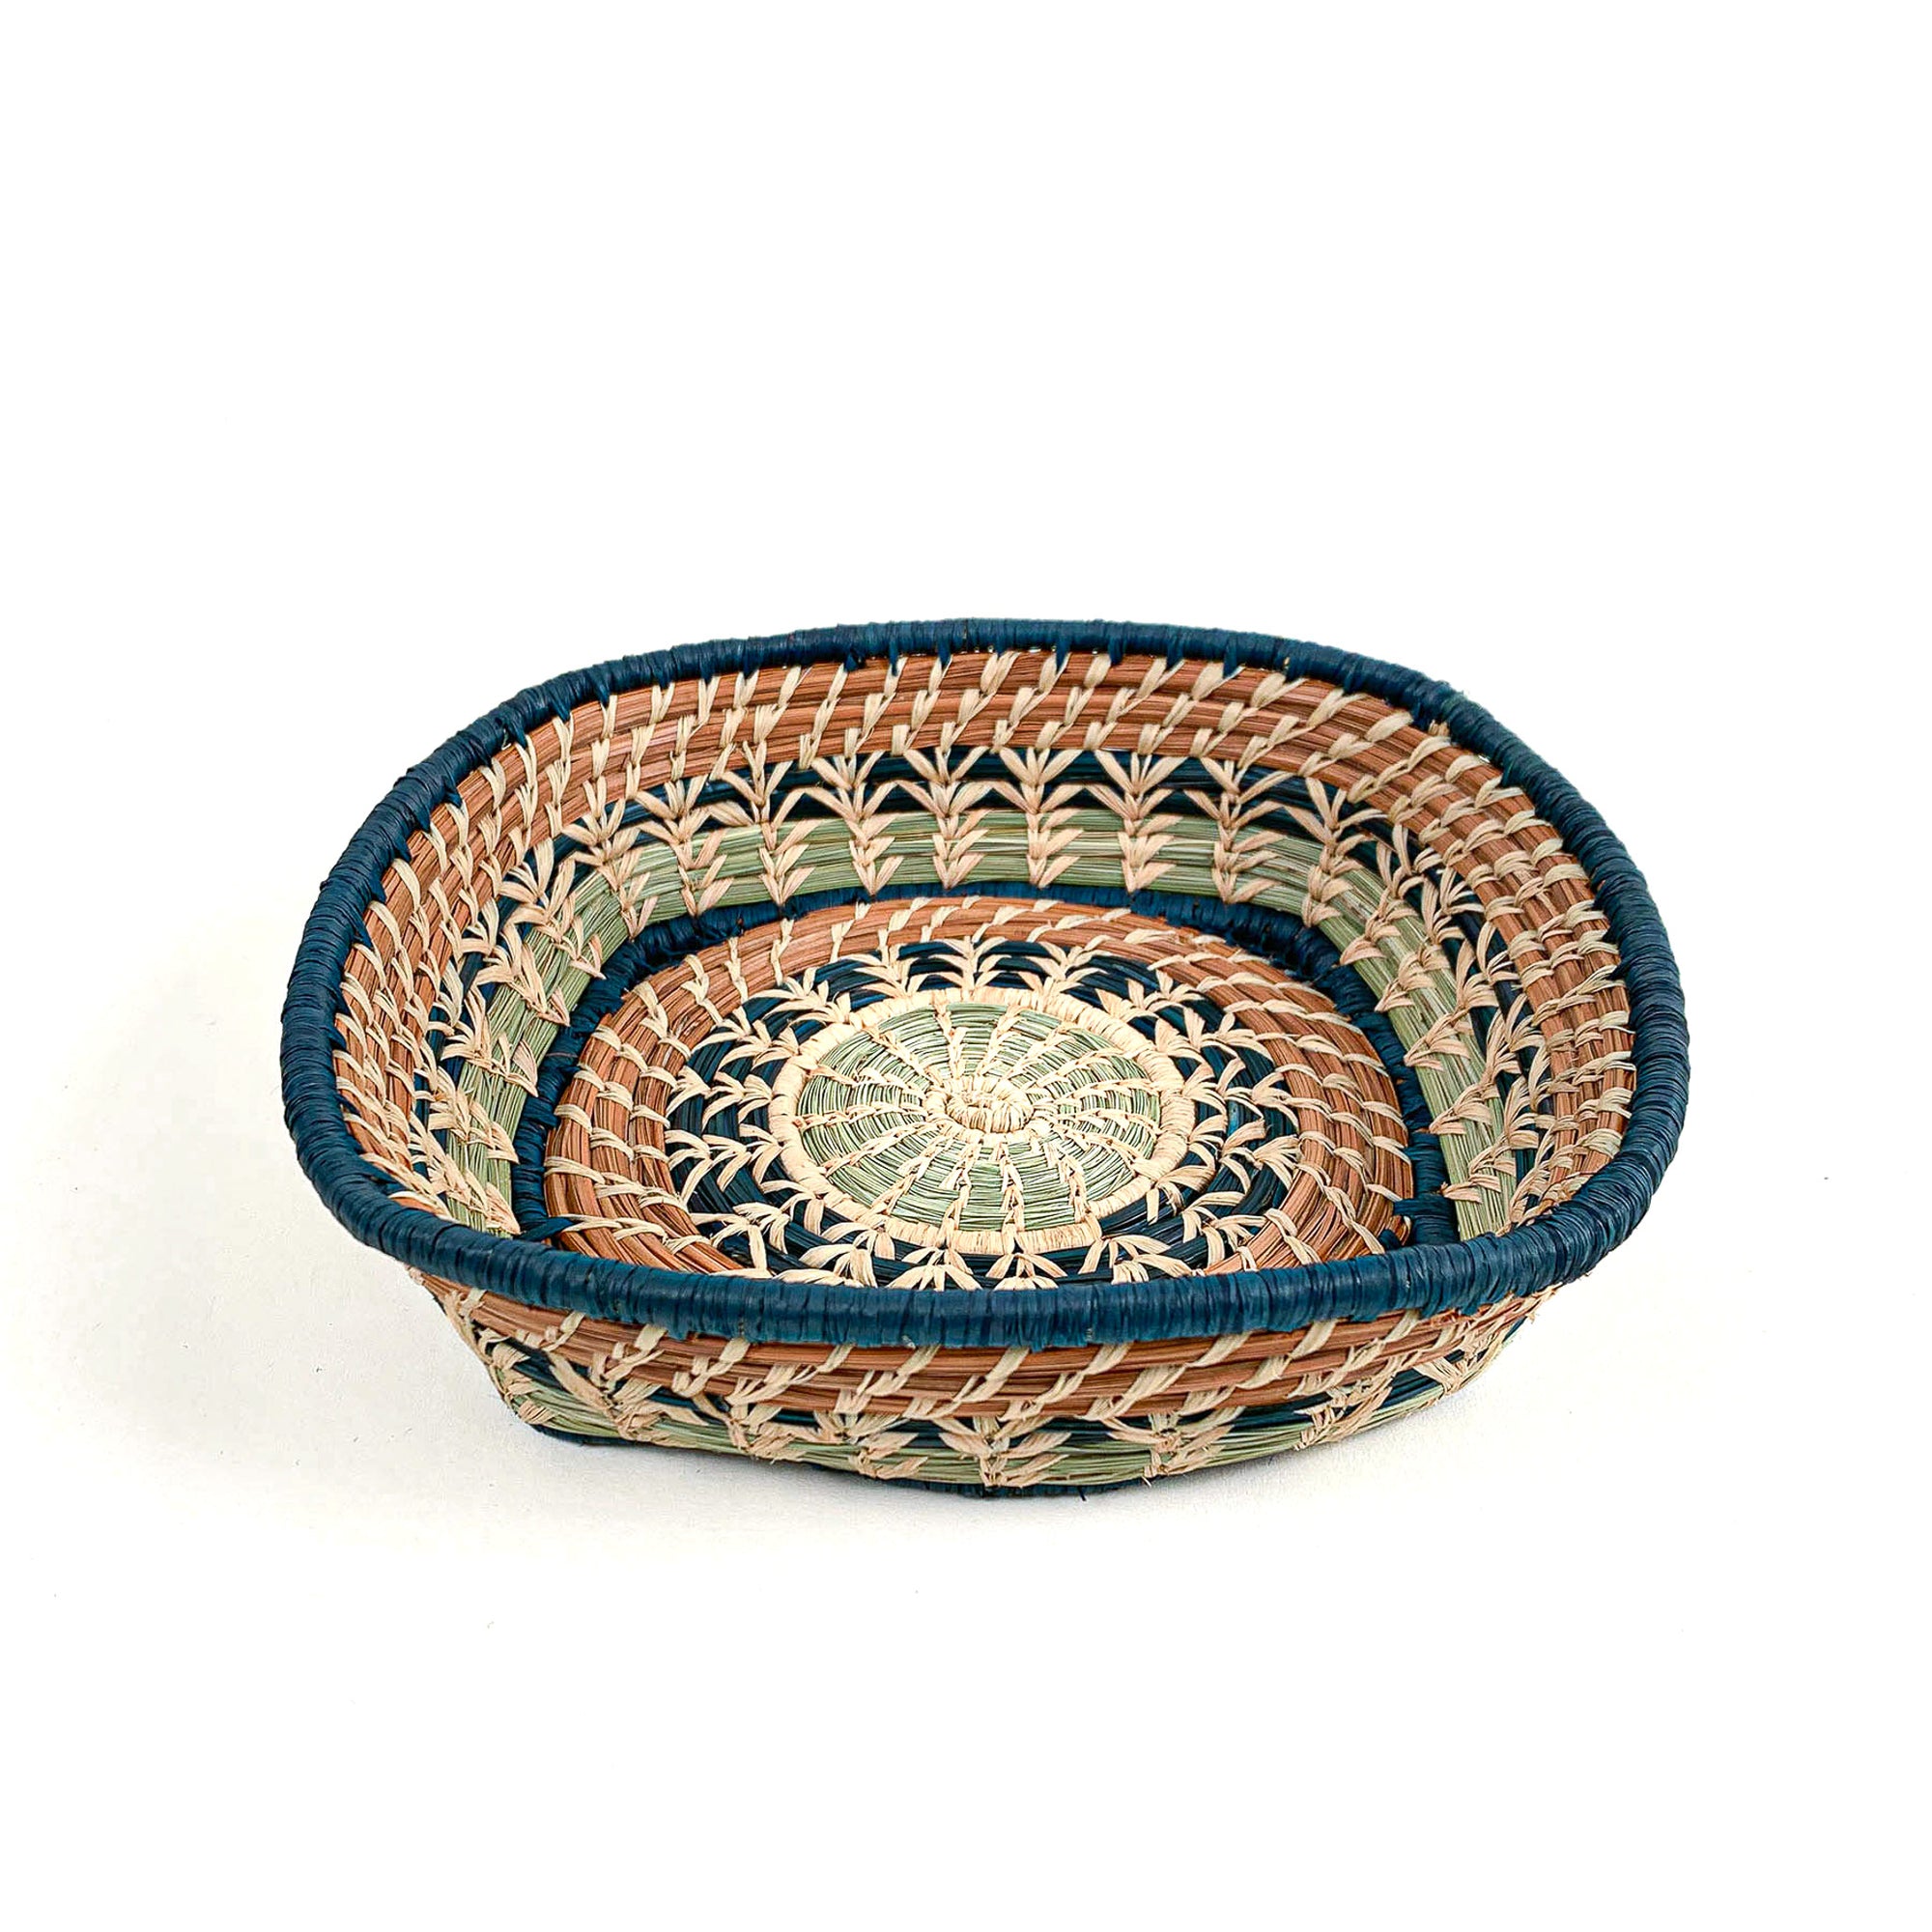 Square basket with circular center in blues and browns